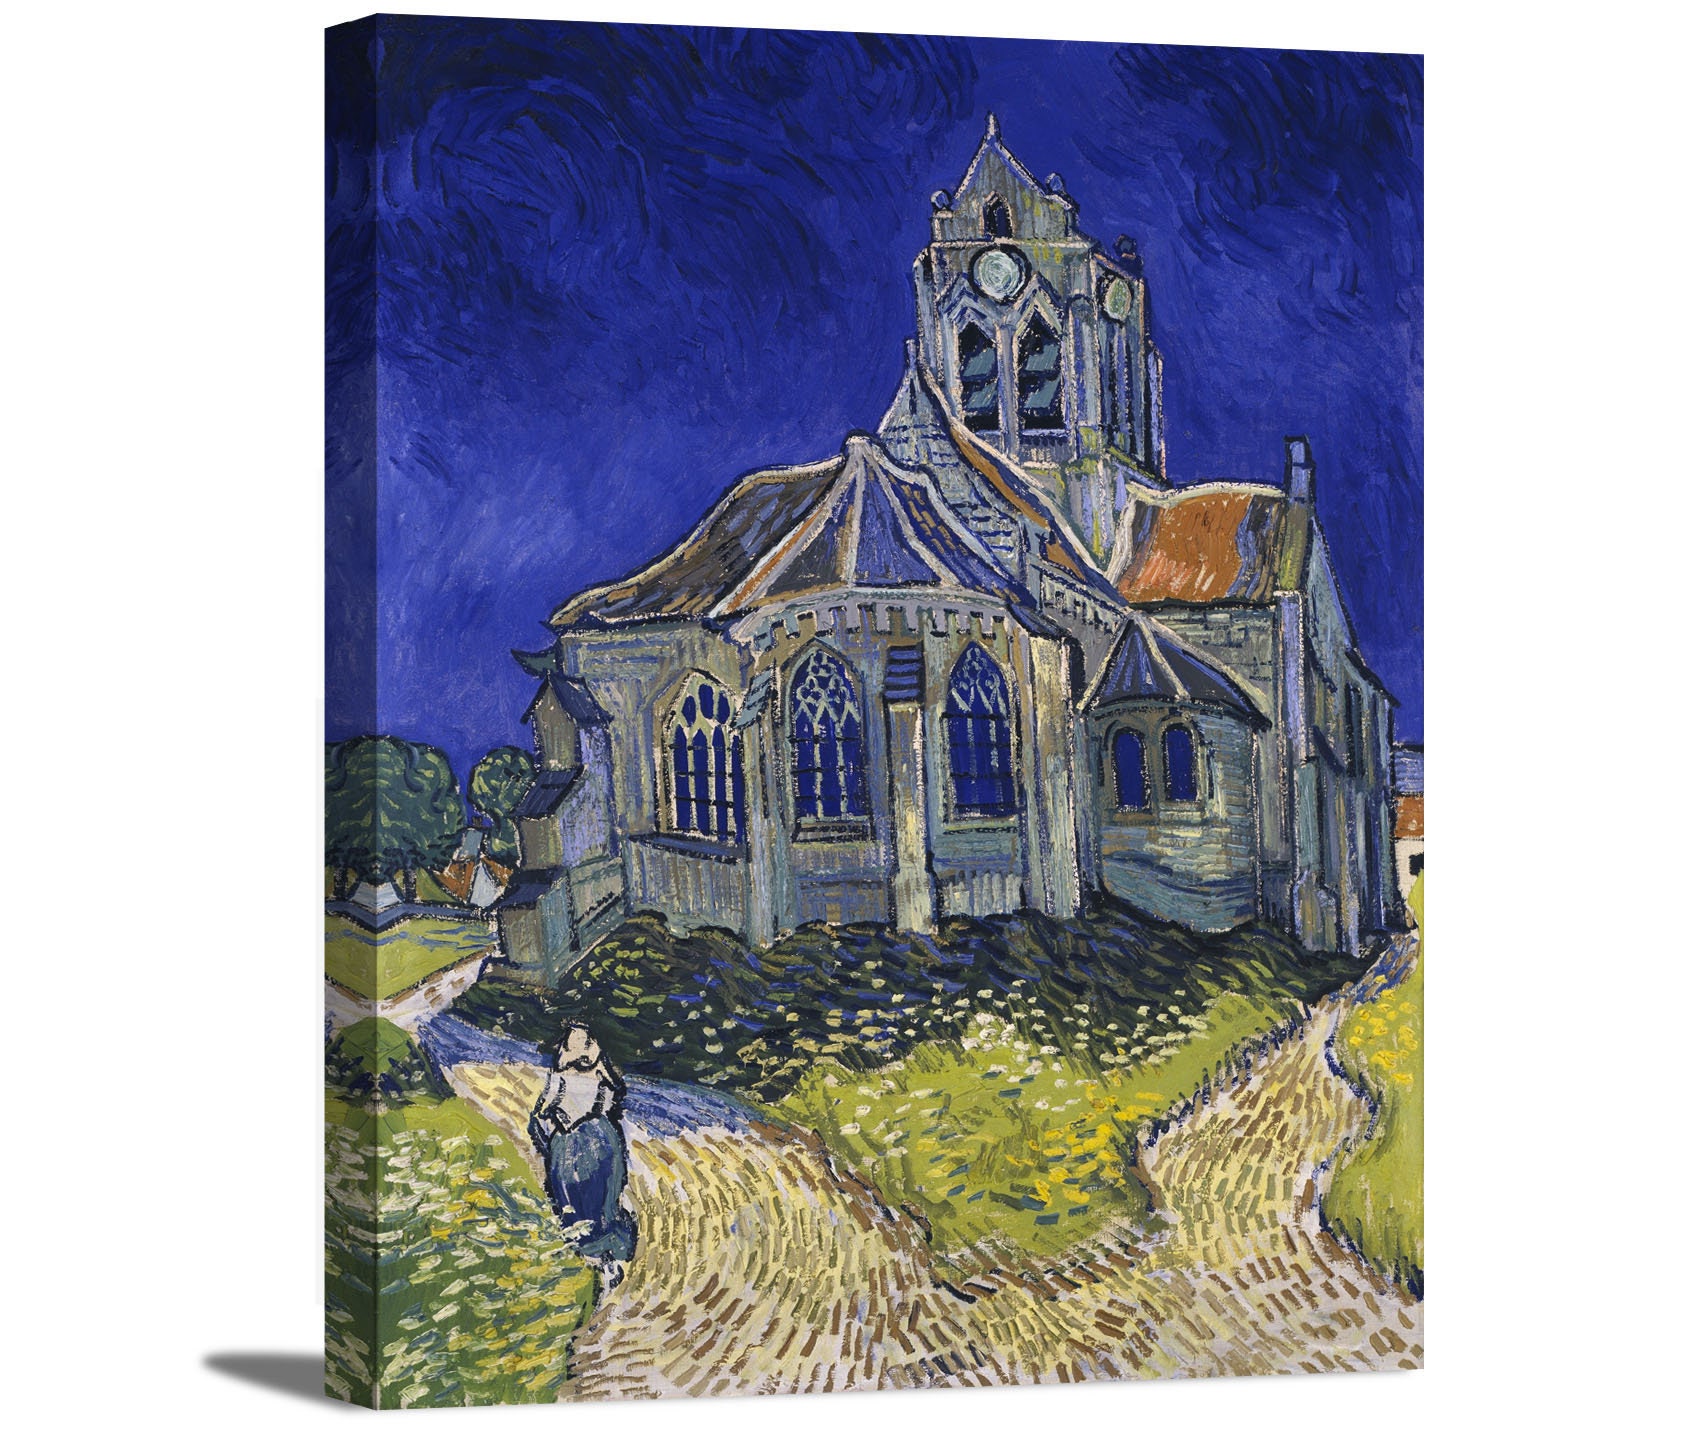 36cm x 46cm) The Church At Auvers By Vincent Van Gogh Gallery Wrapped 